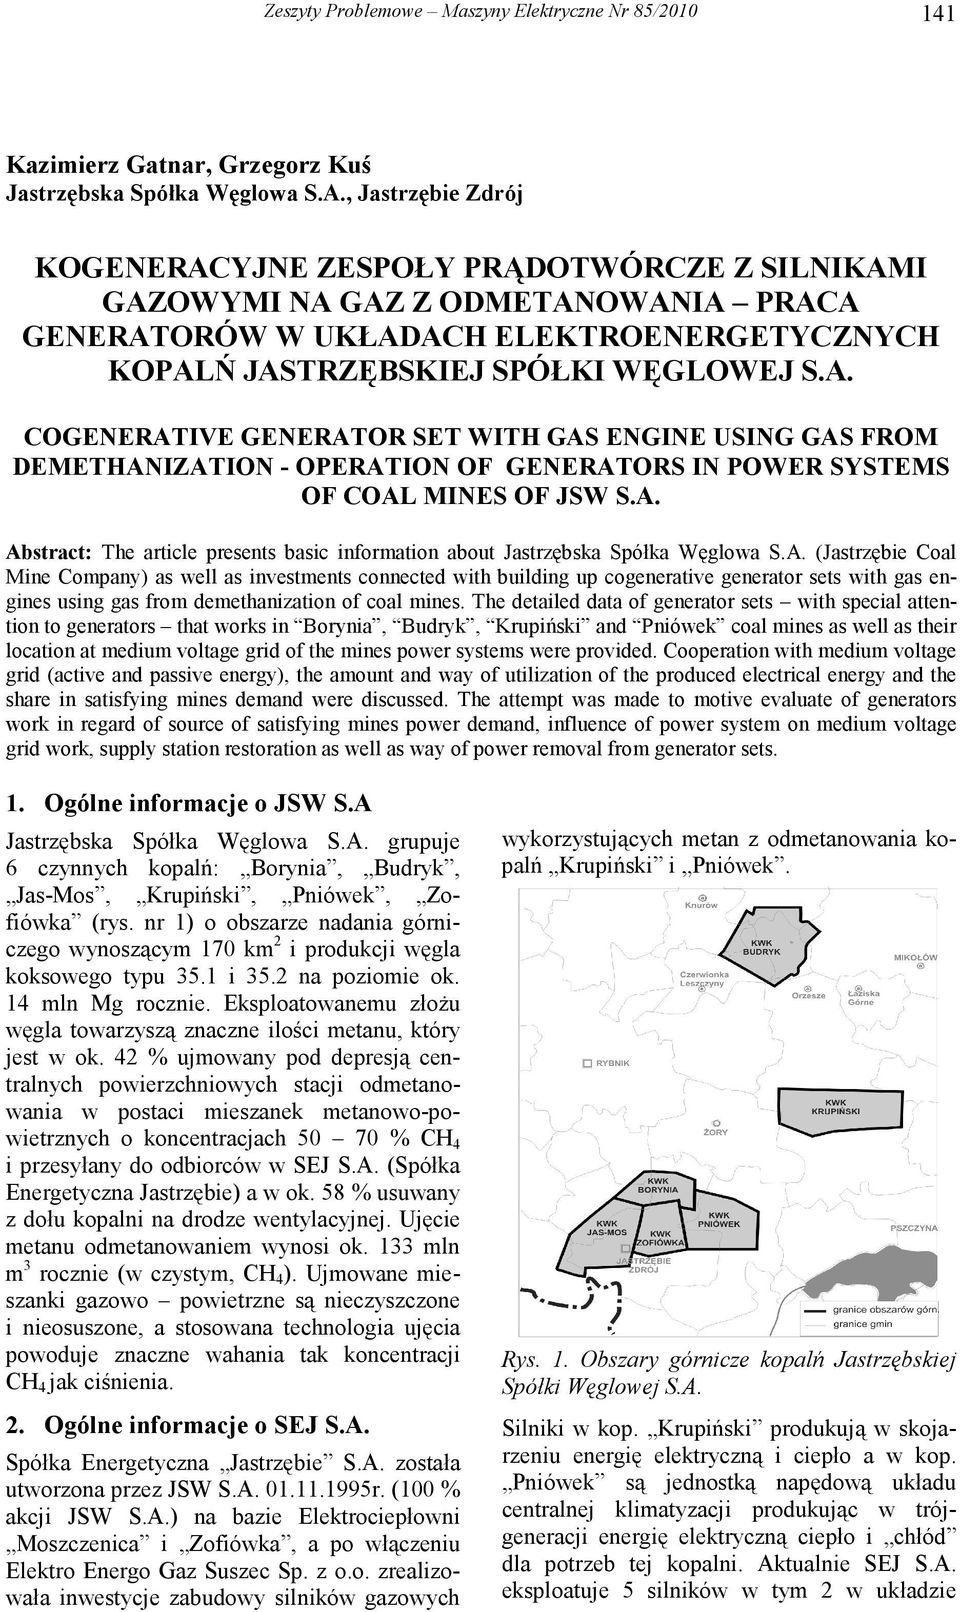 A. Abstract: The article presents basic information about Jastrzębska Spółka Węglowa S.A. (Jastrzębie Coal Mine Company) as well as investments connected with building up cogenerative generator sets with gas engines using gas from demethanization of coal mines.